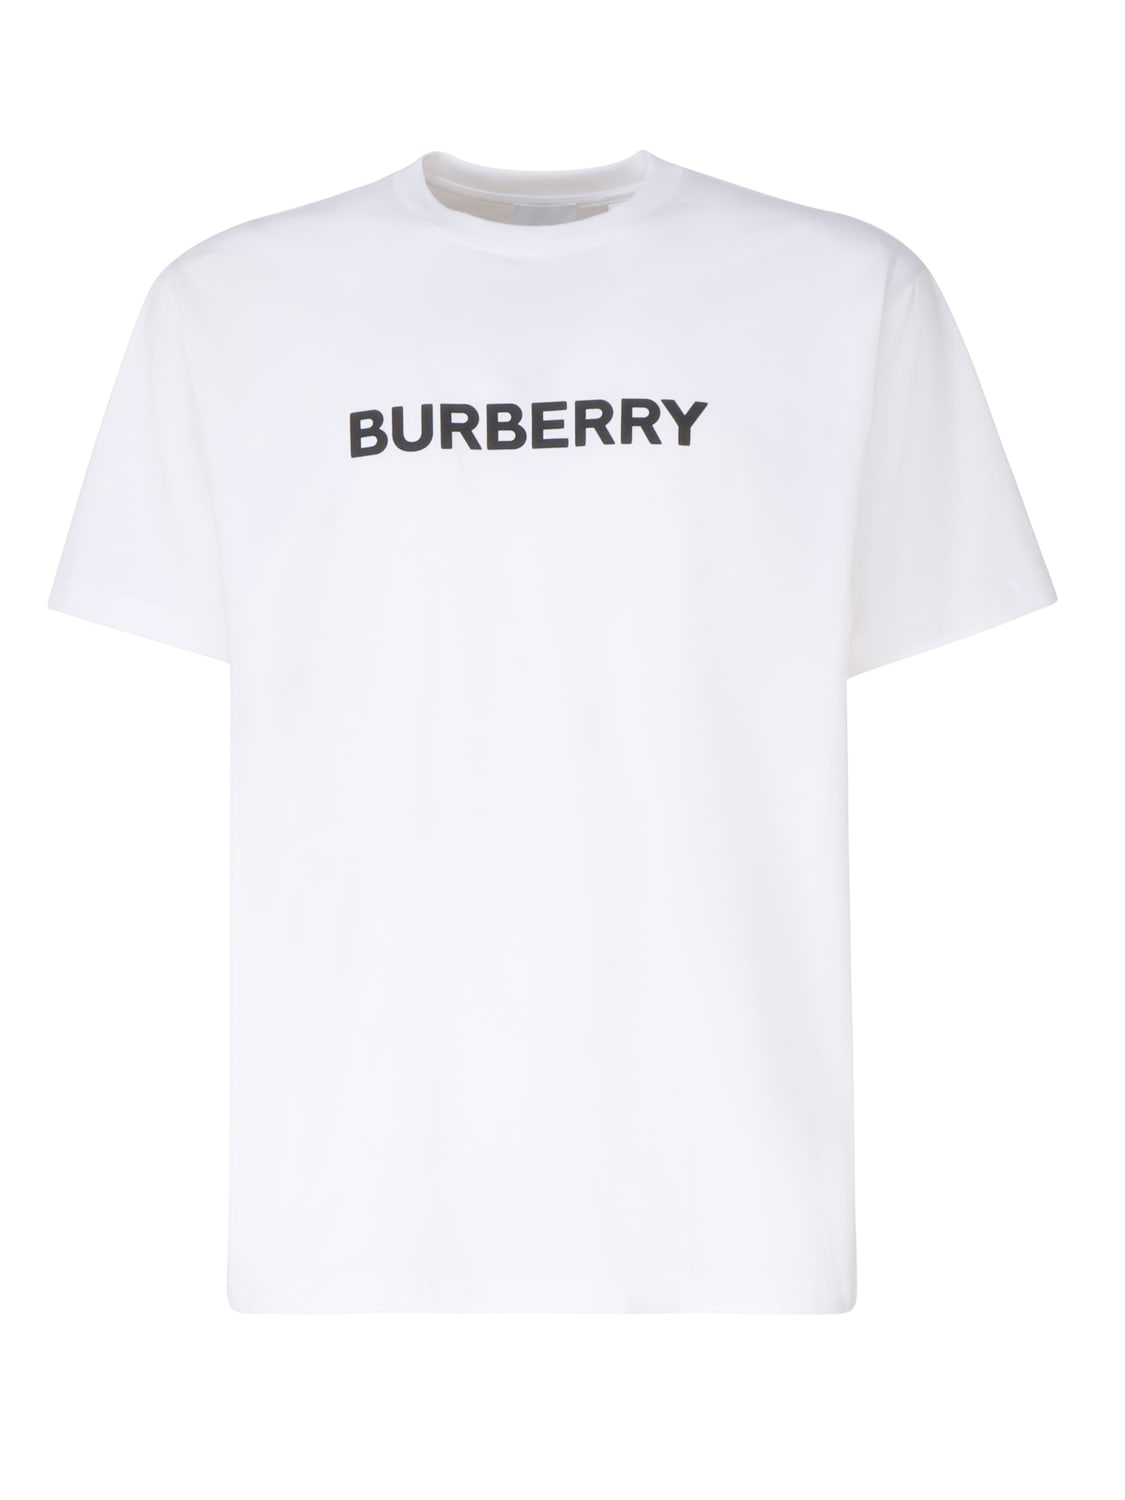 Burberry T-shirt With Print In White